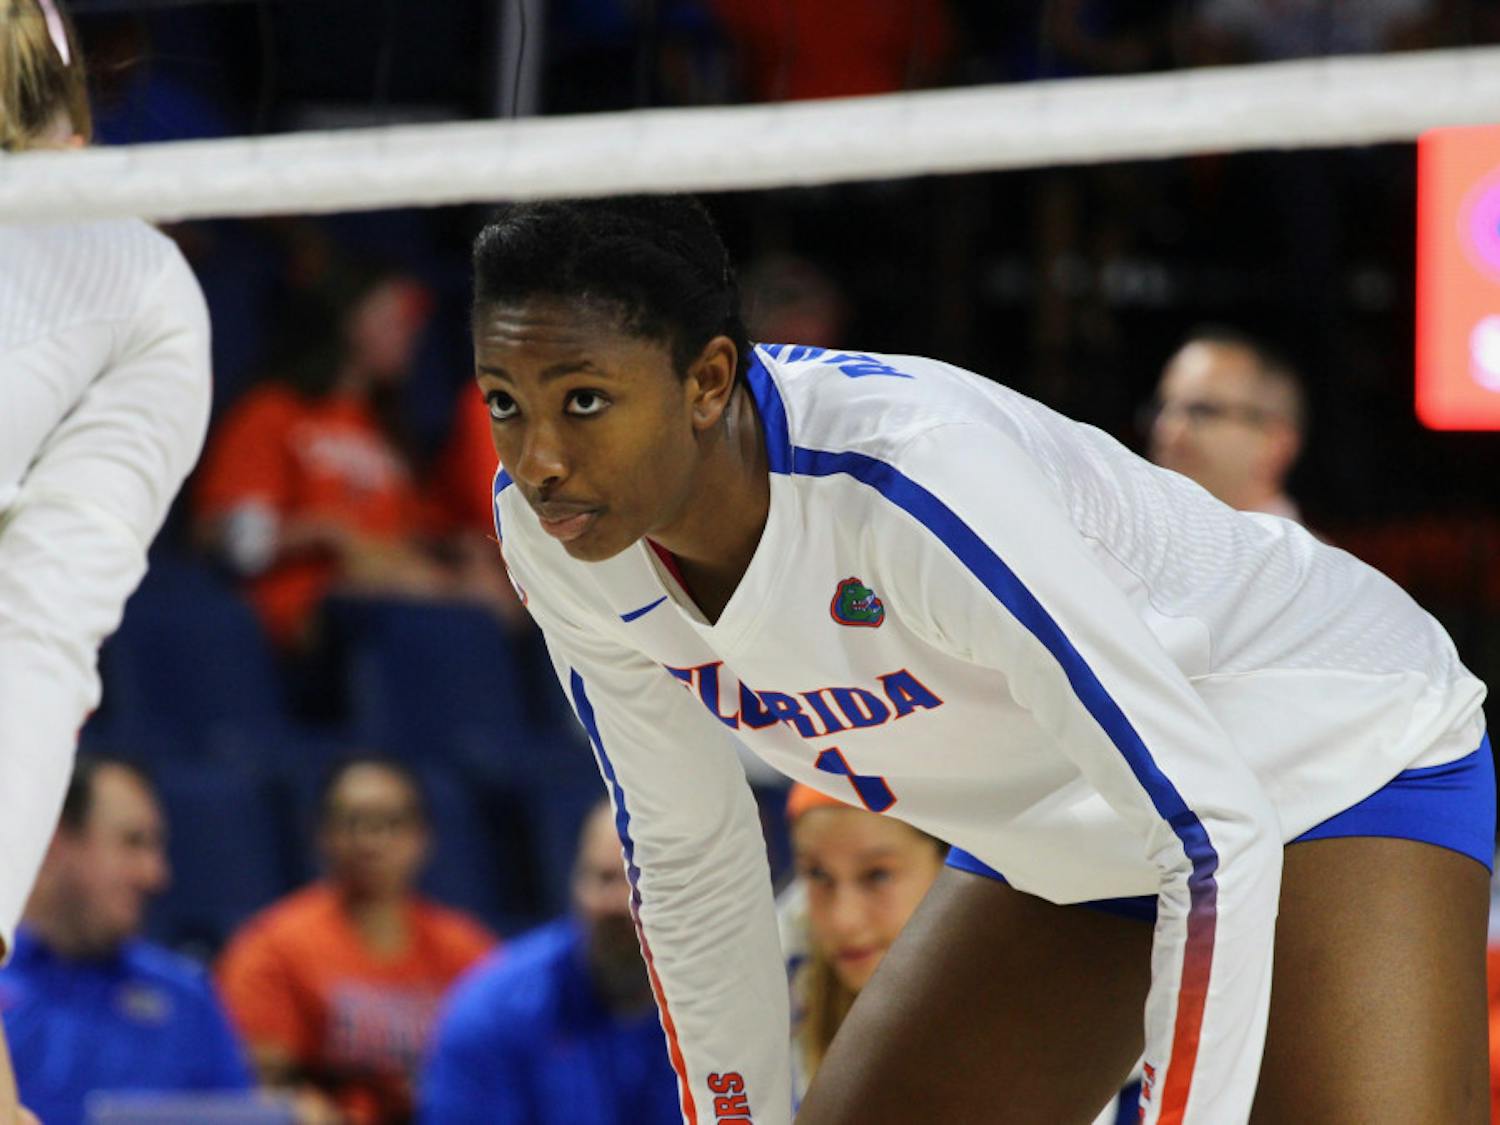 Florida middle blocker Rhamat Alhassan's career at UF came to close Saturday night in the 2017 NCAA national championship match following a 3-1 Gators loss to Nebraska.